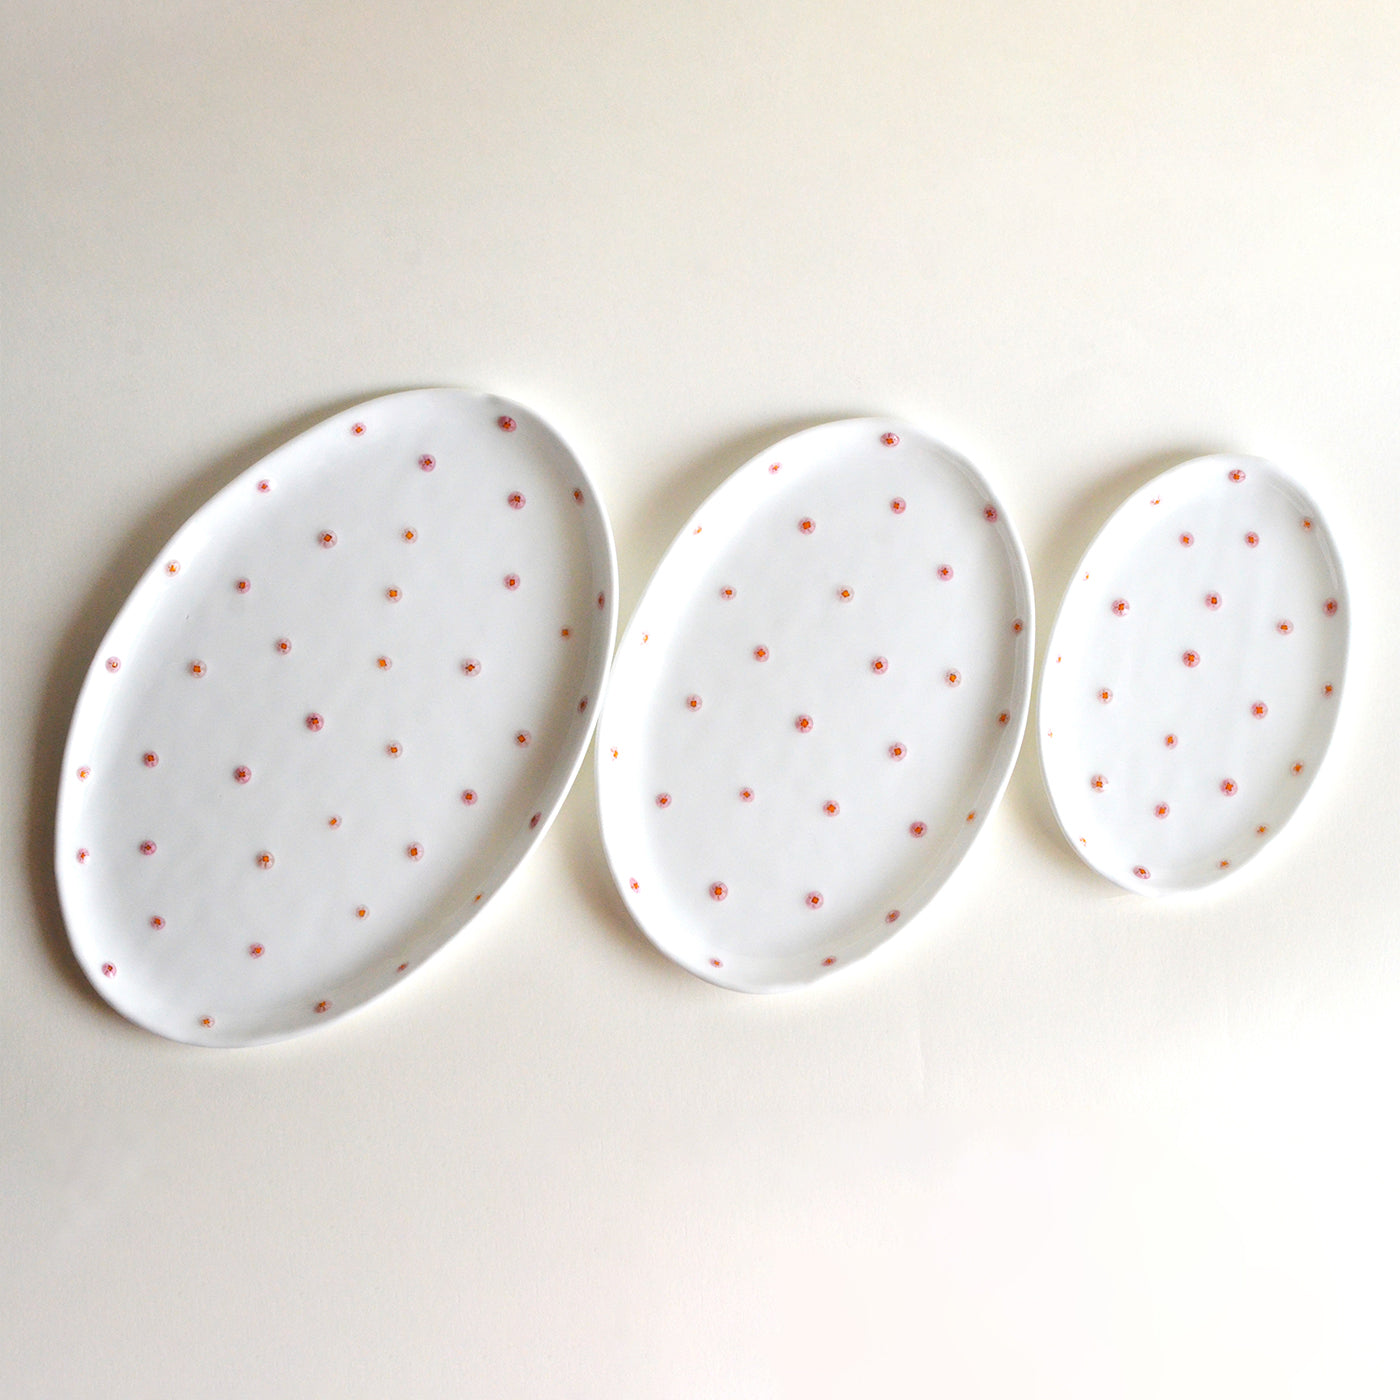 Set Of 4 White Glass Plates with pink murrini inlays - Alternative view 2